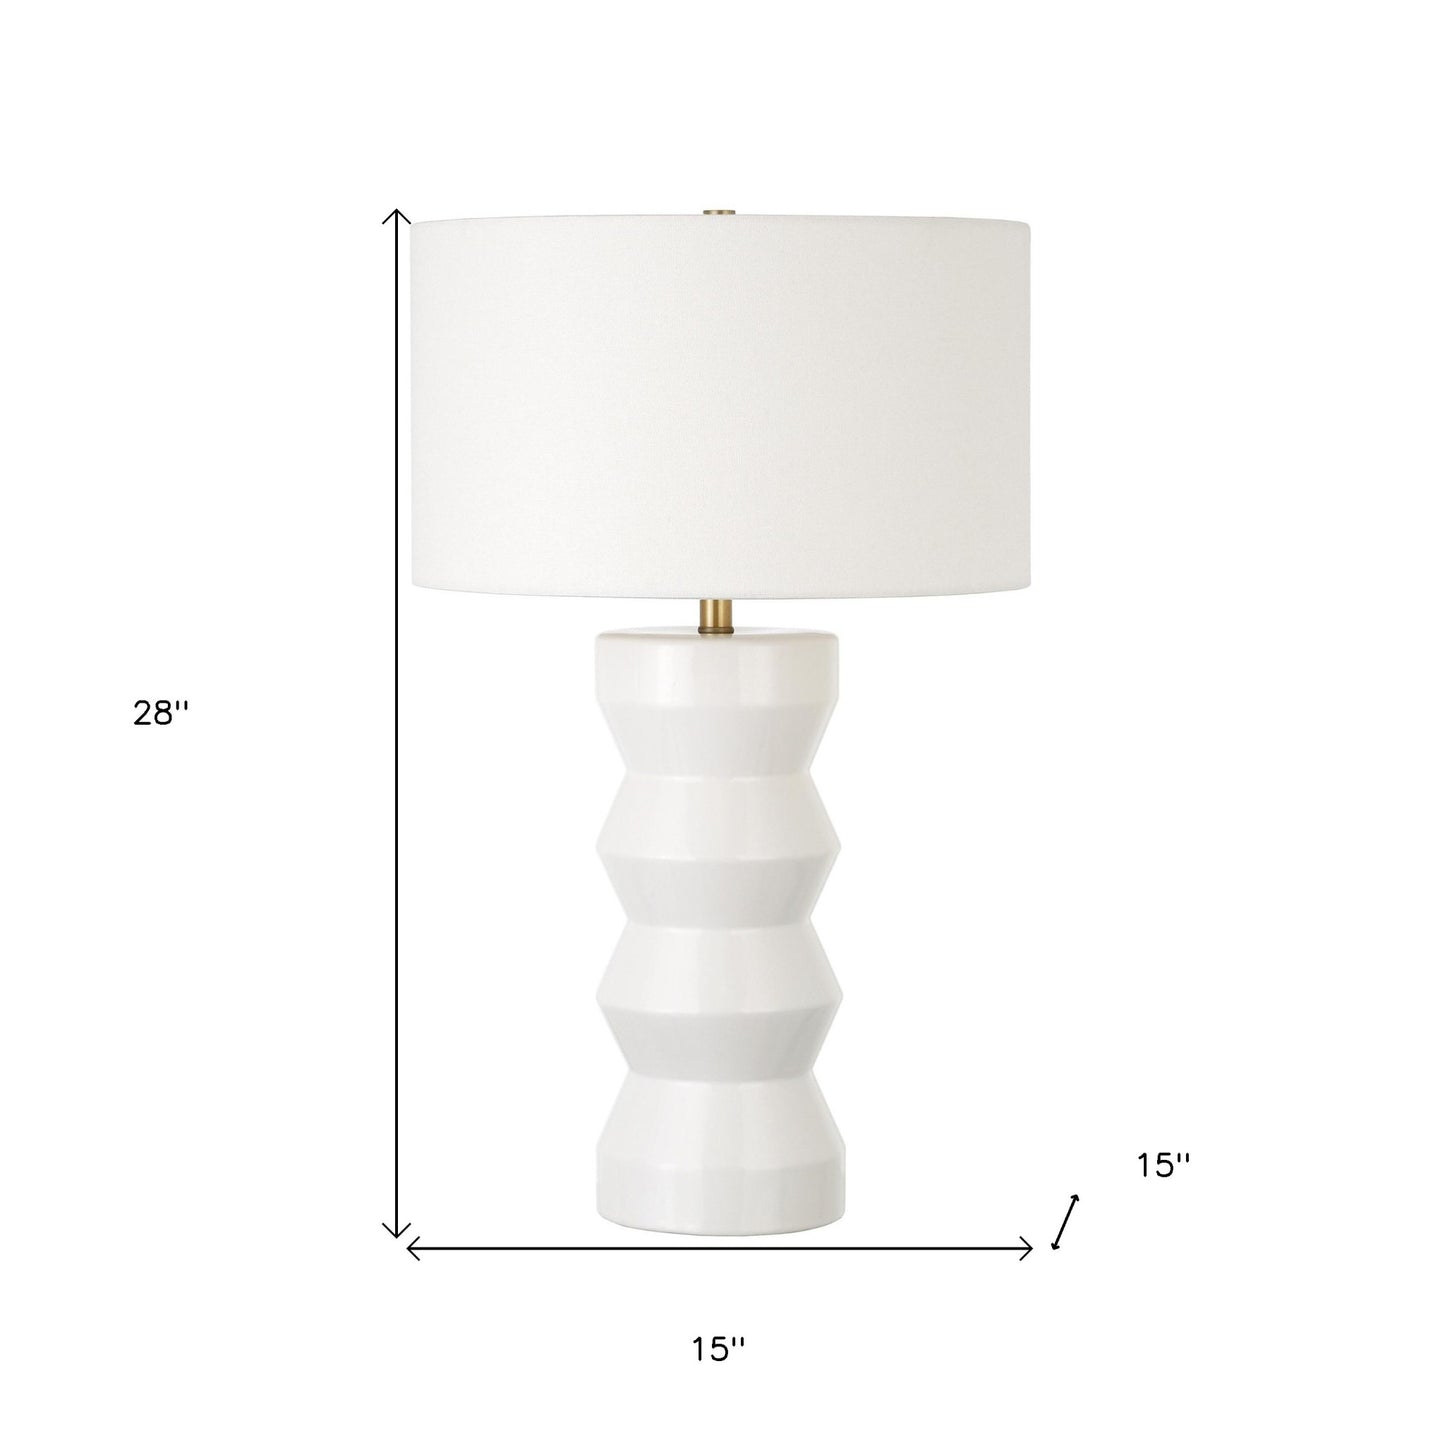 28" White Ceramic Table Lamp With White Drum Shade